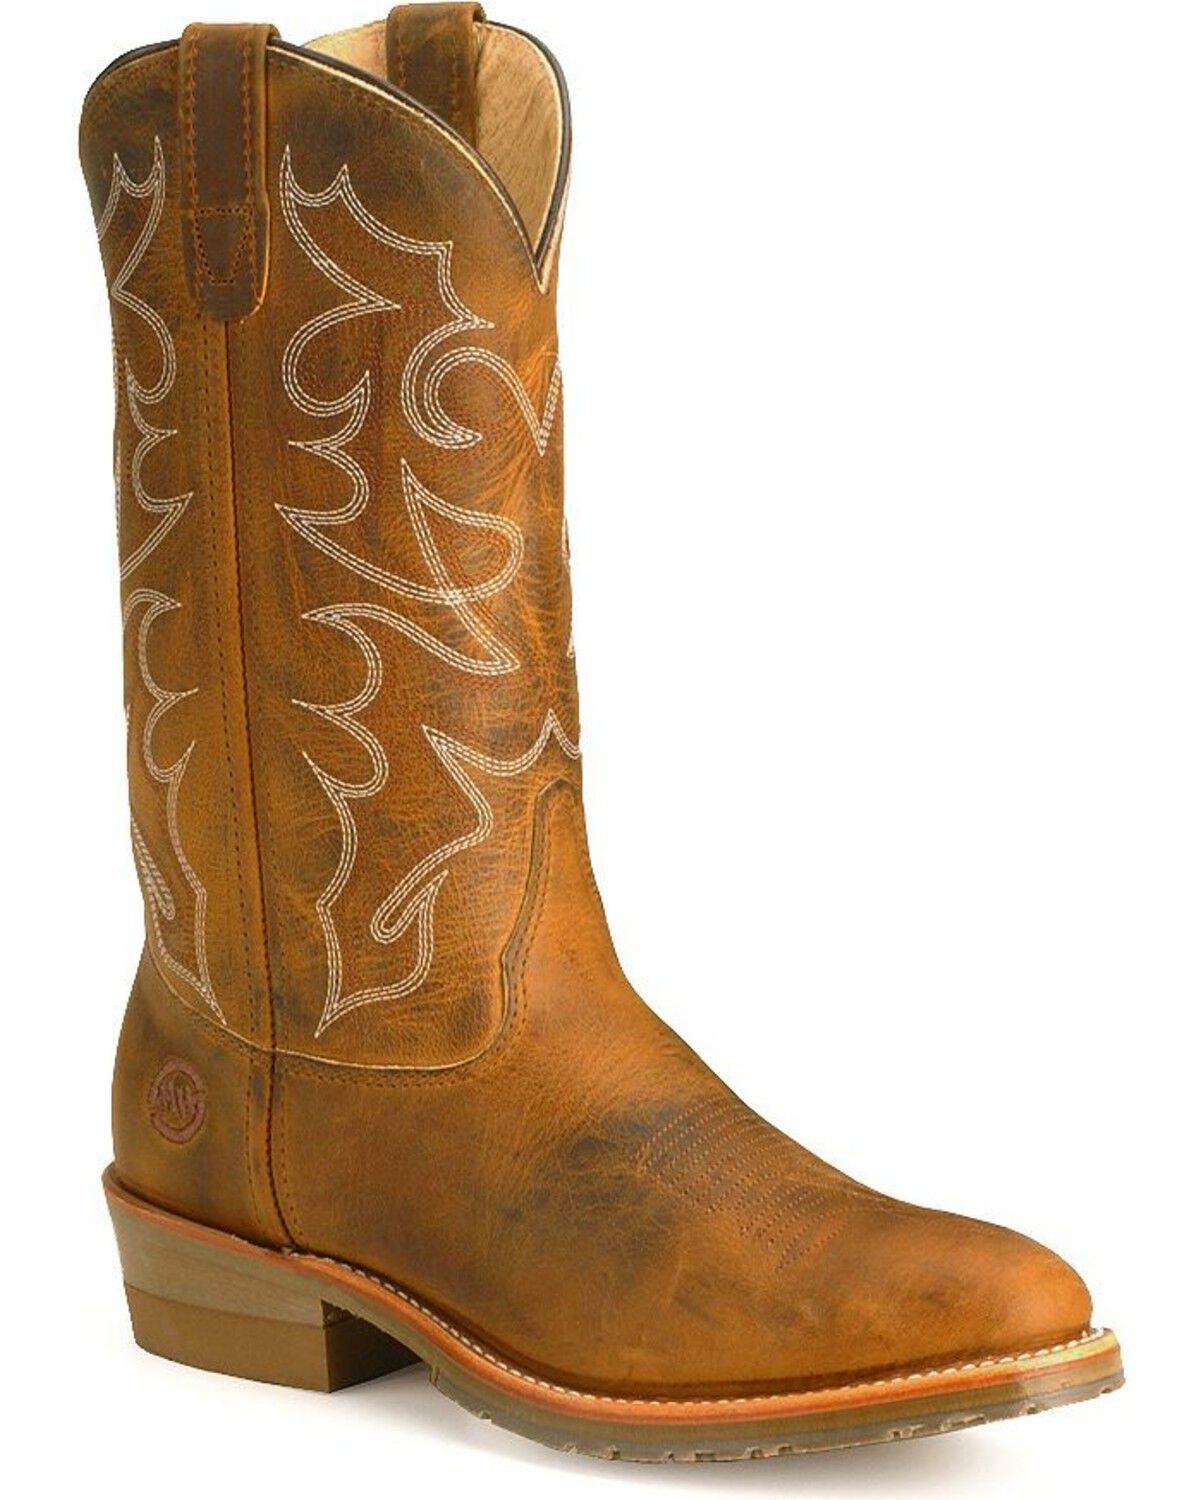 Work Boots, Cowboy Boots \u0026 More - Boot Barn